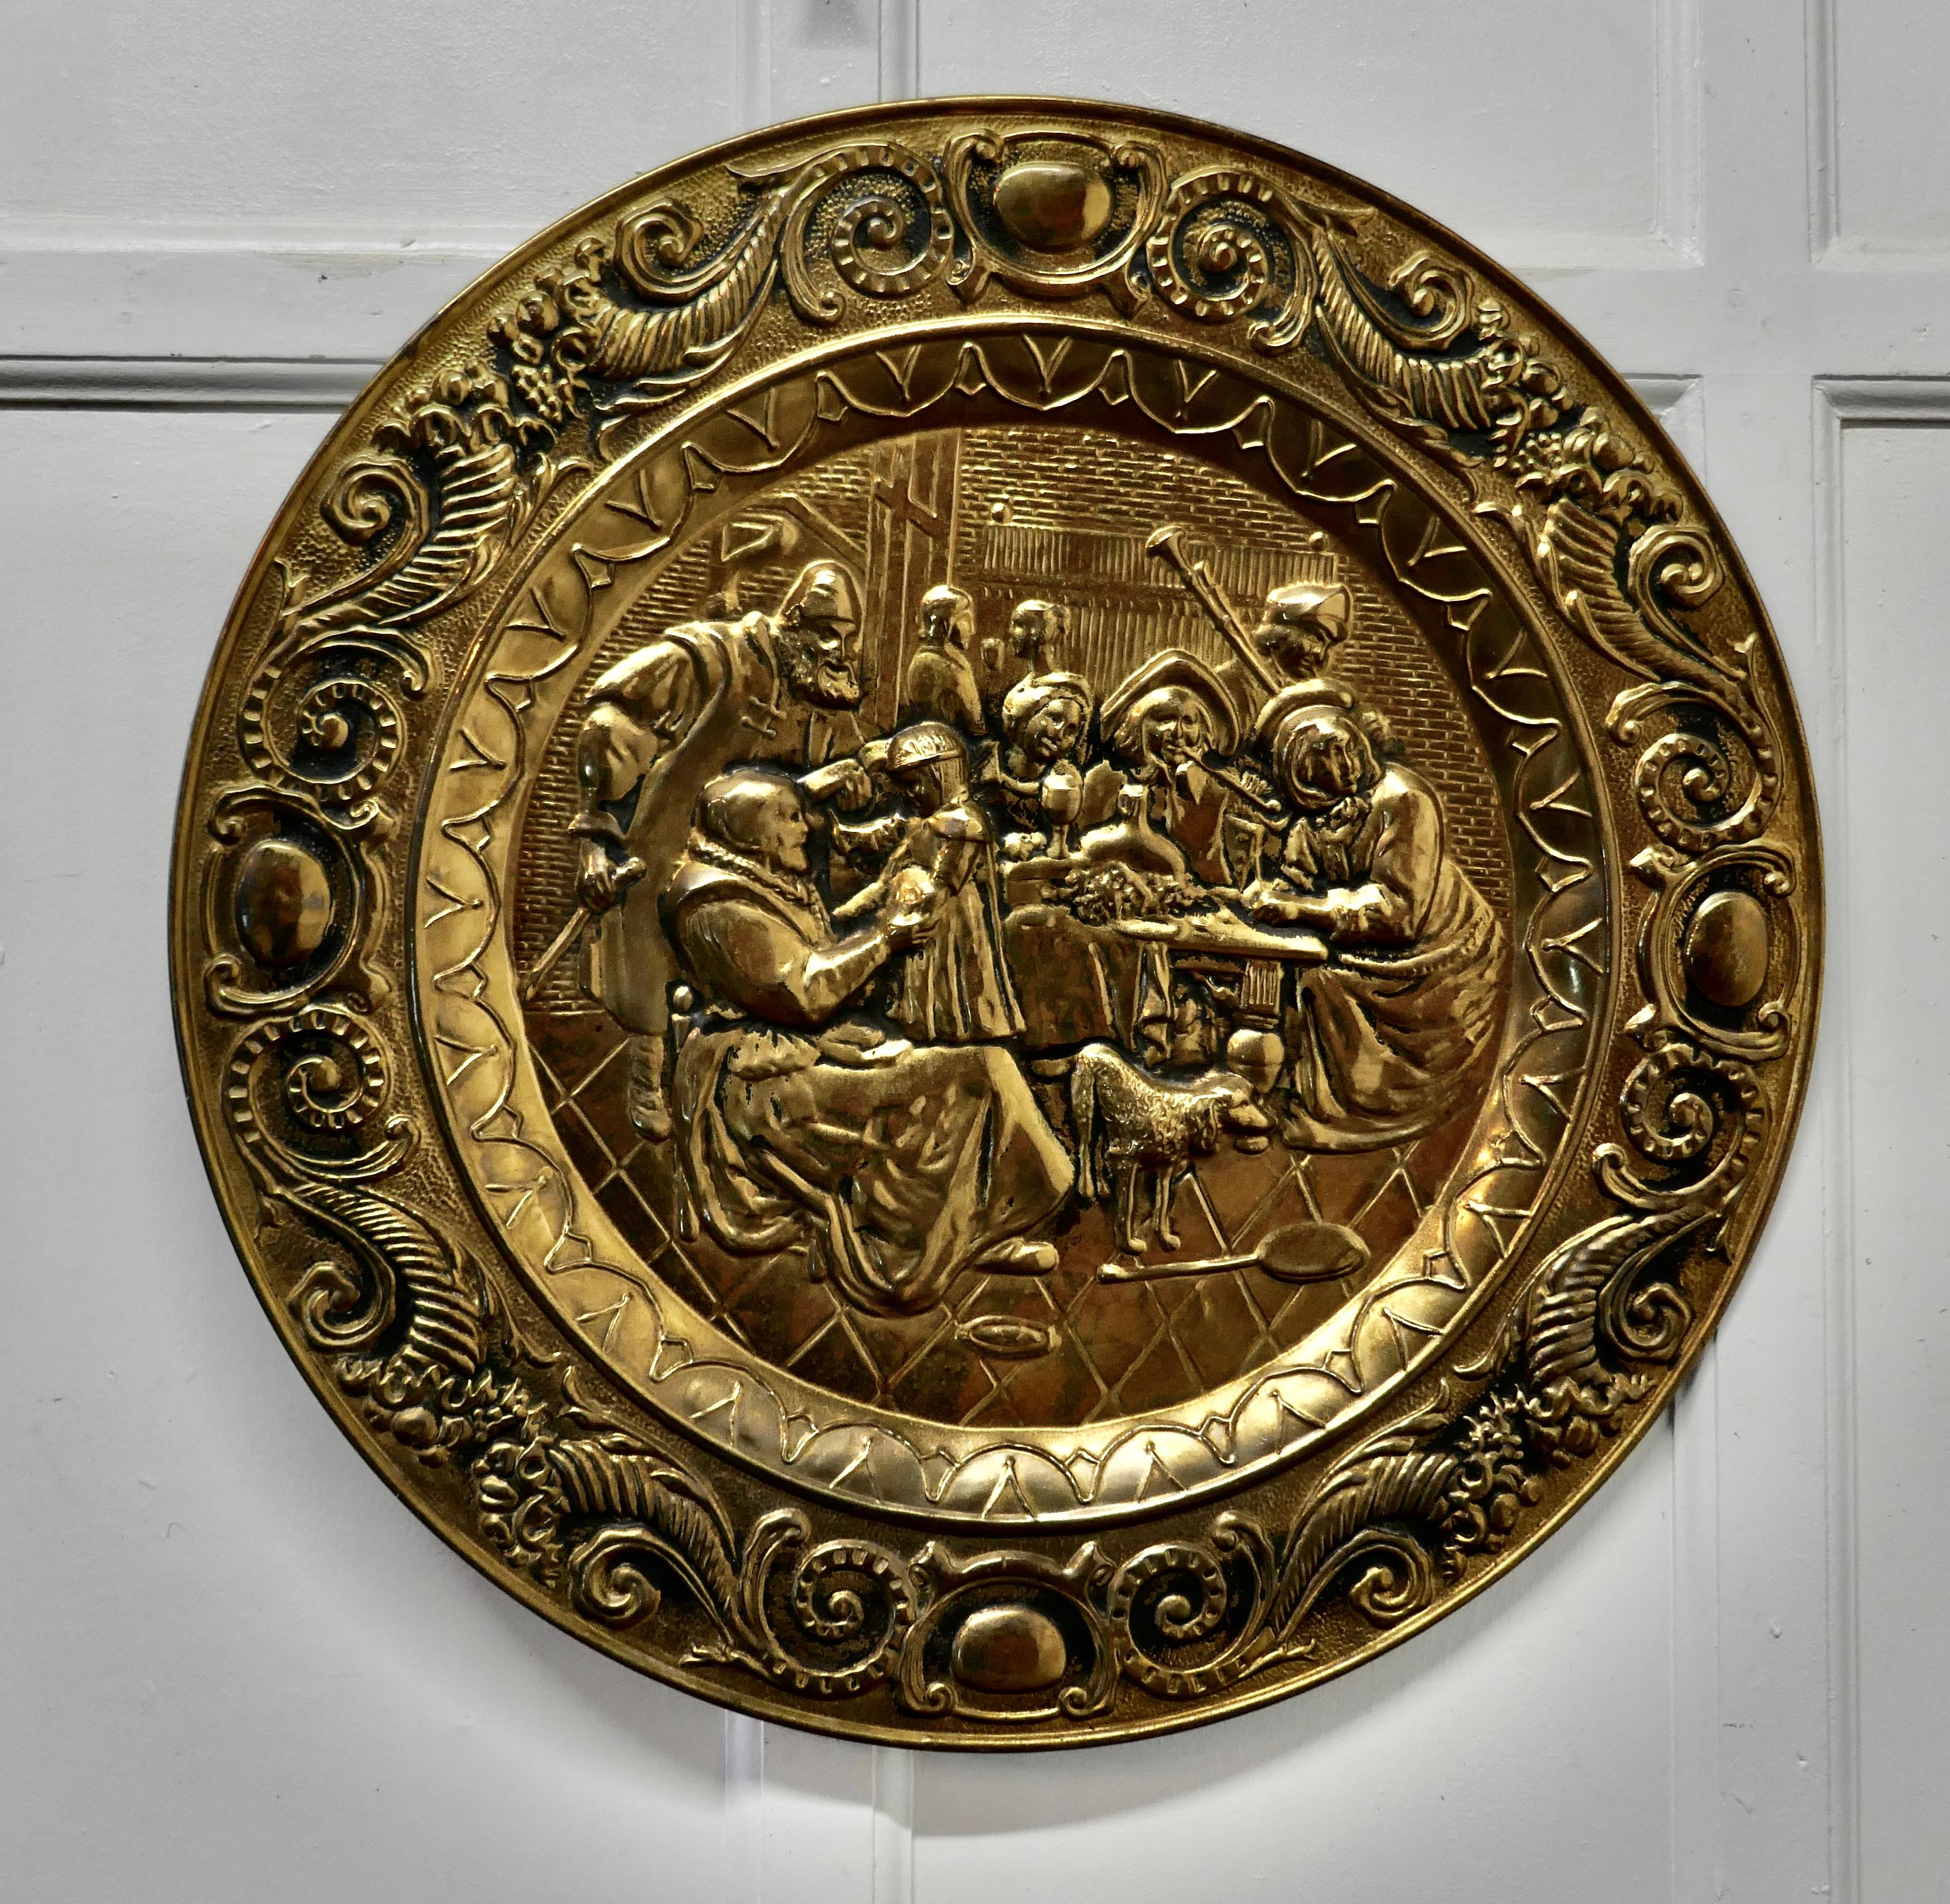 Large Arts & Crafts embossed brass wall hanging charger

This is a large decorative wall piece the charger is made in beaten brass and has a merry tavern scene in the centre and an elaborate 4” wide border
A good looking piece of traditional pub